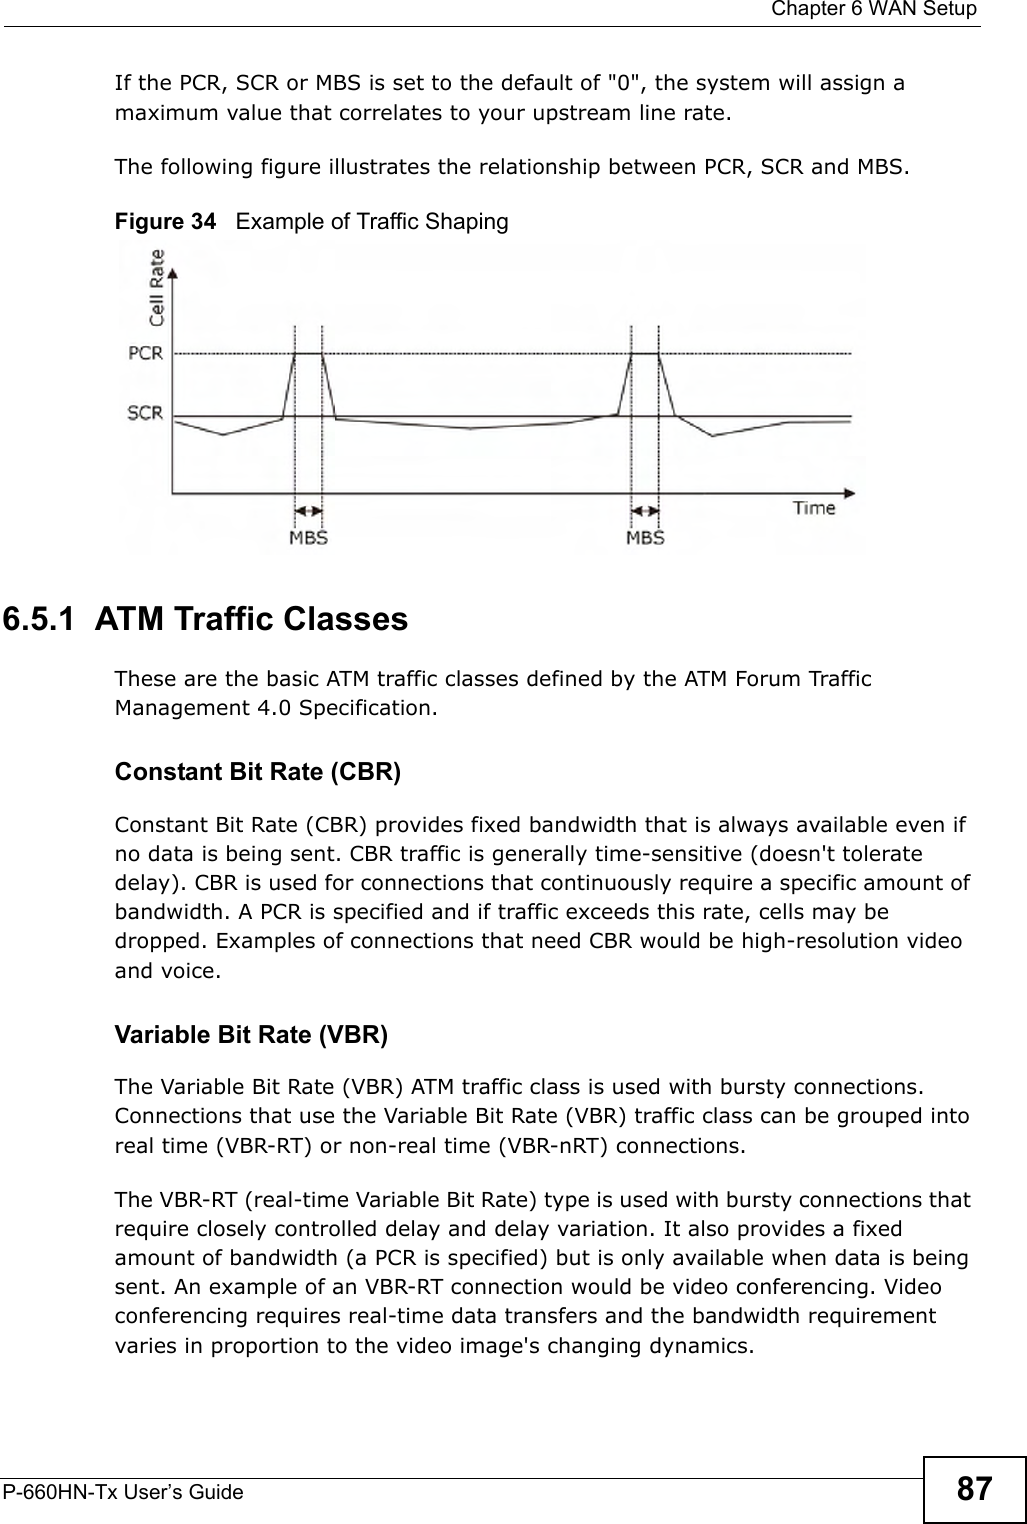  Chapter 6 WAN SetupP-660HN-Tx User’s Guide 87If the PCR, SCR or MBS is set to the default of &quot;0&quot;, the system will assign a maximum value that correlates to your upstream line rate. The following figure illustrates the relationship between PCR, SCR and MBS. Figure 34   Example of Traffic Shaping6.5.1  ATM Traffic ClassesThese are the basic ATM traffic classes defined by the ATM Forum Traffic Management 4.0 Specification. Constant Bit Rate (CBR)Constant Bit Rate (CBR) provides fixed bandwidth that is always available even if no data is being sent. CBR traffic is generally time-sensitive (doesn&apos;t tolerate delay). CBR is used for connections that continuously require a specific amount of bandwidth. A PCR is specified and if traffic exceeds this rate, cells may be dropped. Examples of connections that need CBR would be high-resolution video and voice.Variable Bit Rate (VBR) The Variable Bit Rate (VBR) ATM traffic class is used with bursty connections. Connections that use the Variable Bit Rate (VBR) traffic class can be grouped into real time (VBR-RT) or non-real time (VBR-nRT) connections. The VBR-RT (real-time Variable Bit Rate) type is used with bursty connections that require closely controlled delay and delay variation. It also provides a fixed amount of bandwidth (a PCR is specified) but is only available when data is being sent. An example of an VBR-RT connection would be video conferencing. Video conferencing requires real-time data transfers and the bandwidth requirement varies in proportion to the video image&apos;s changing dynamics. 